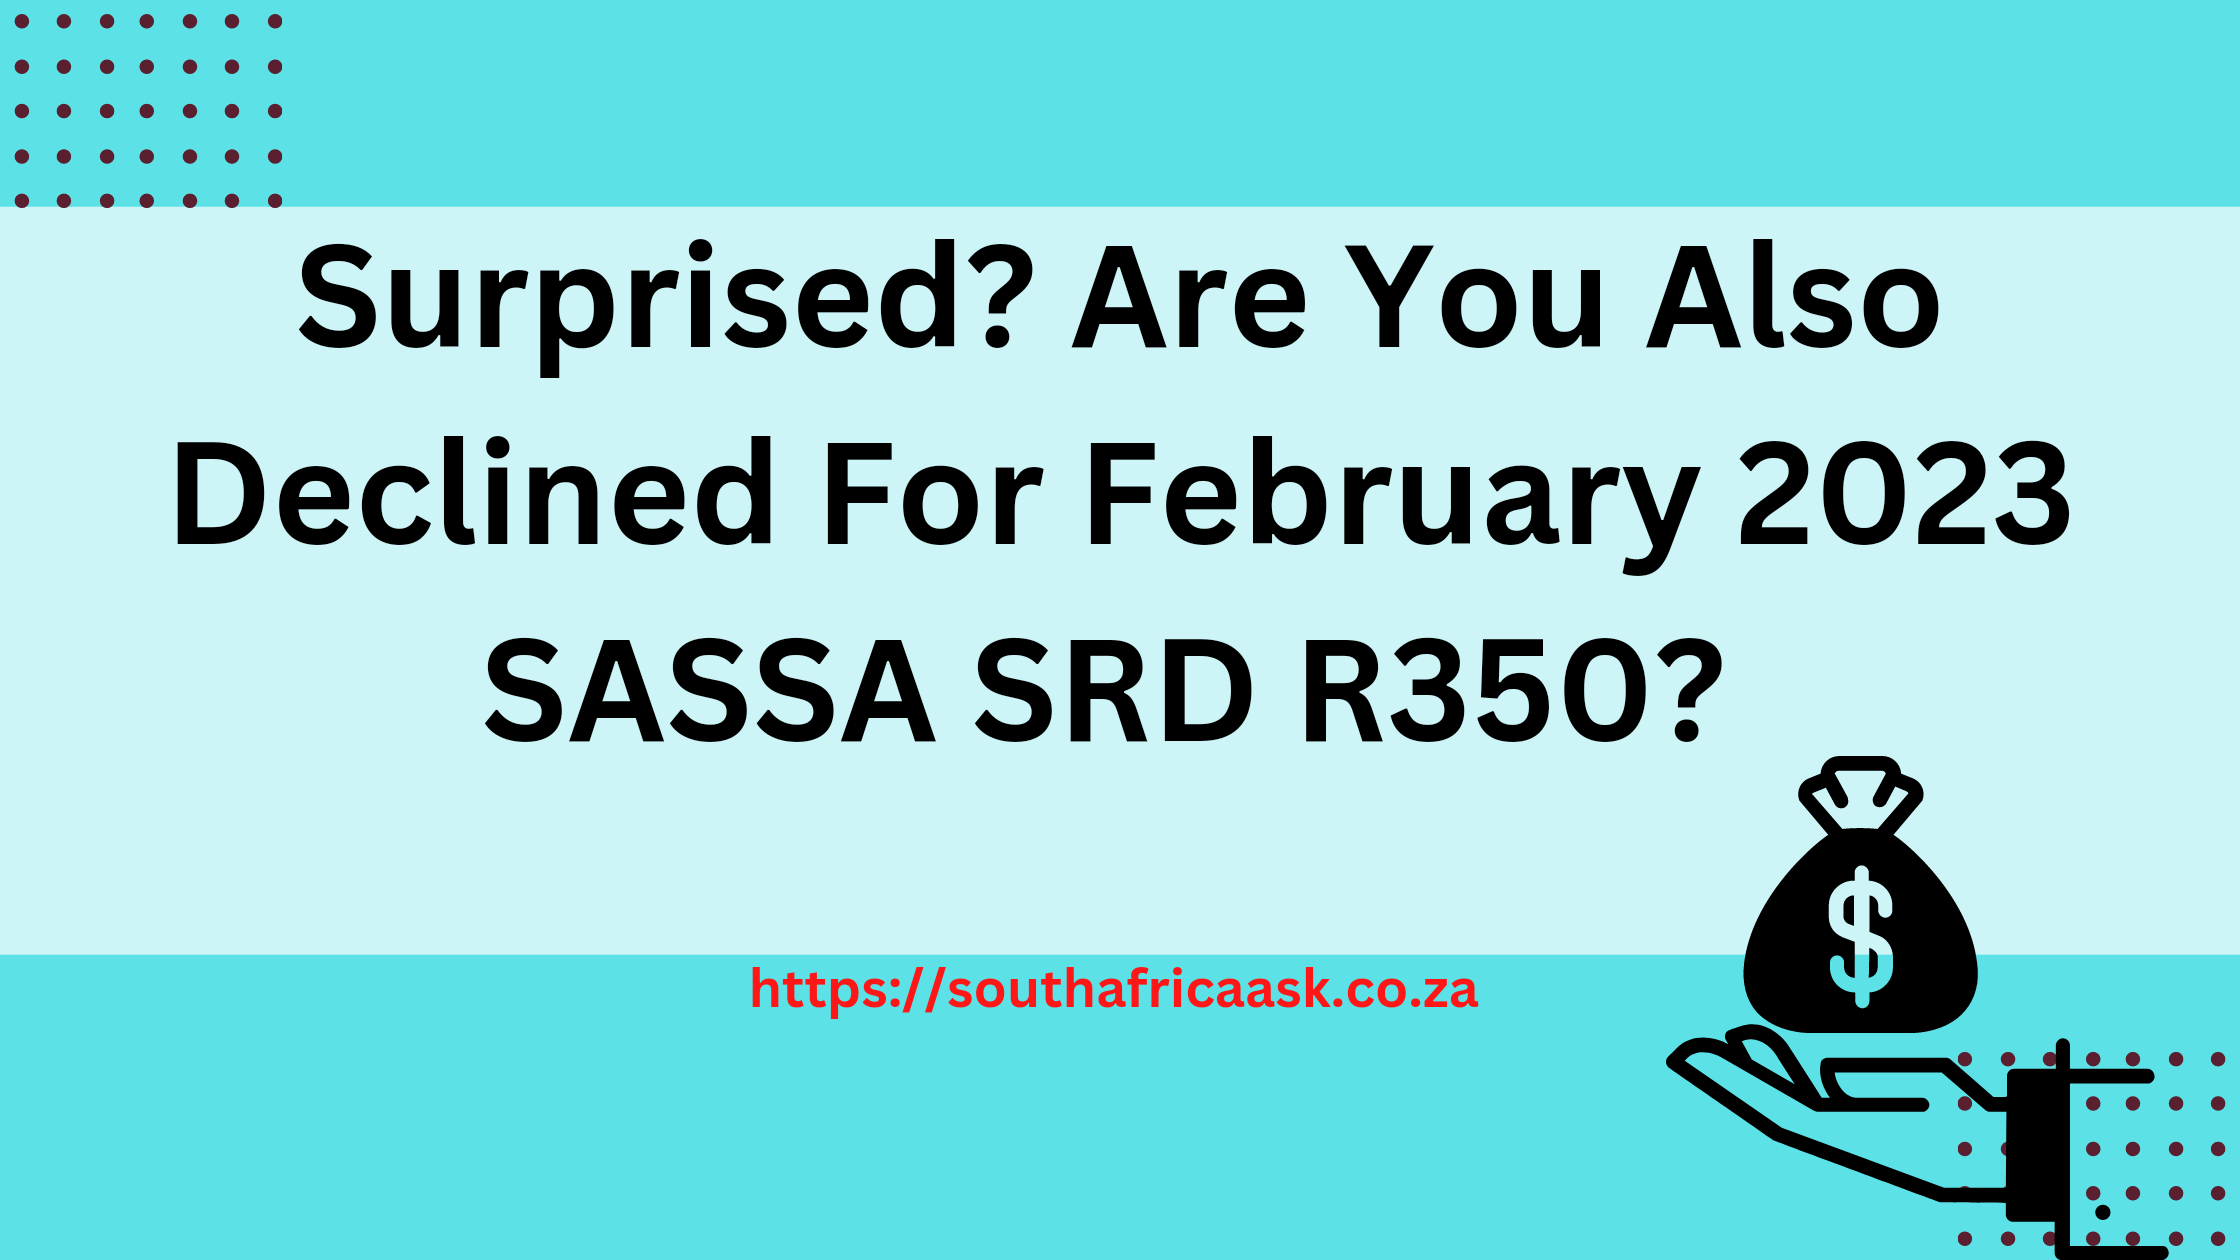 Surprised? Are You Also Declined For February 2023 SASSA SRD R350?